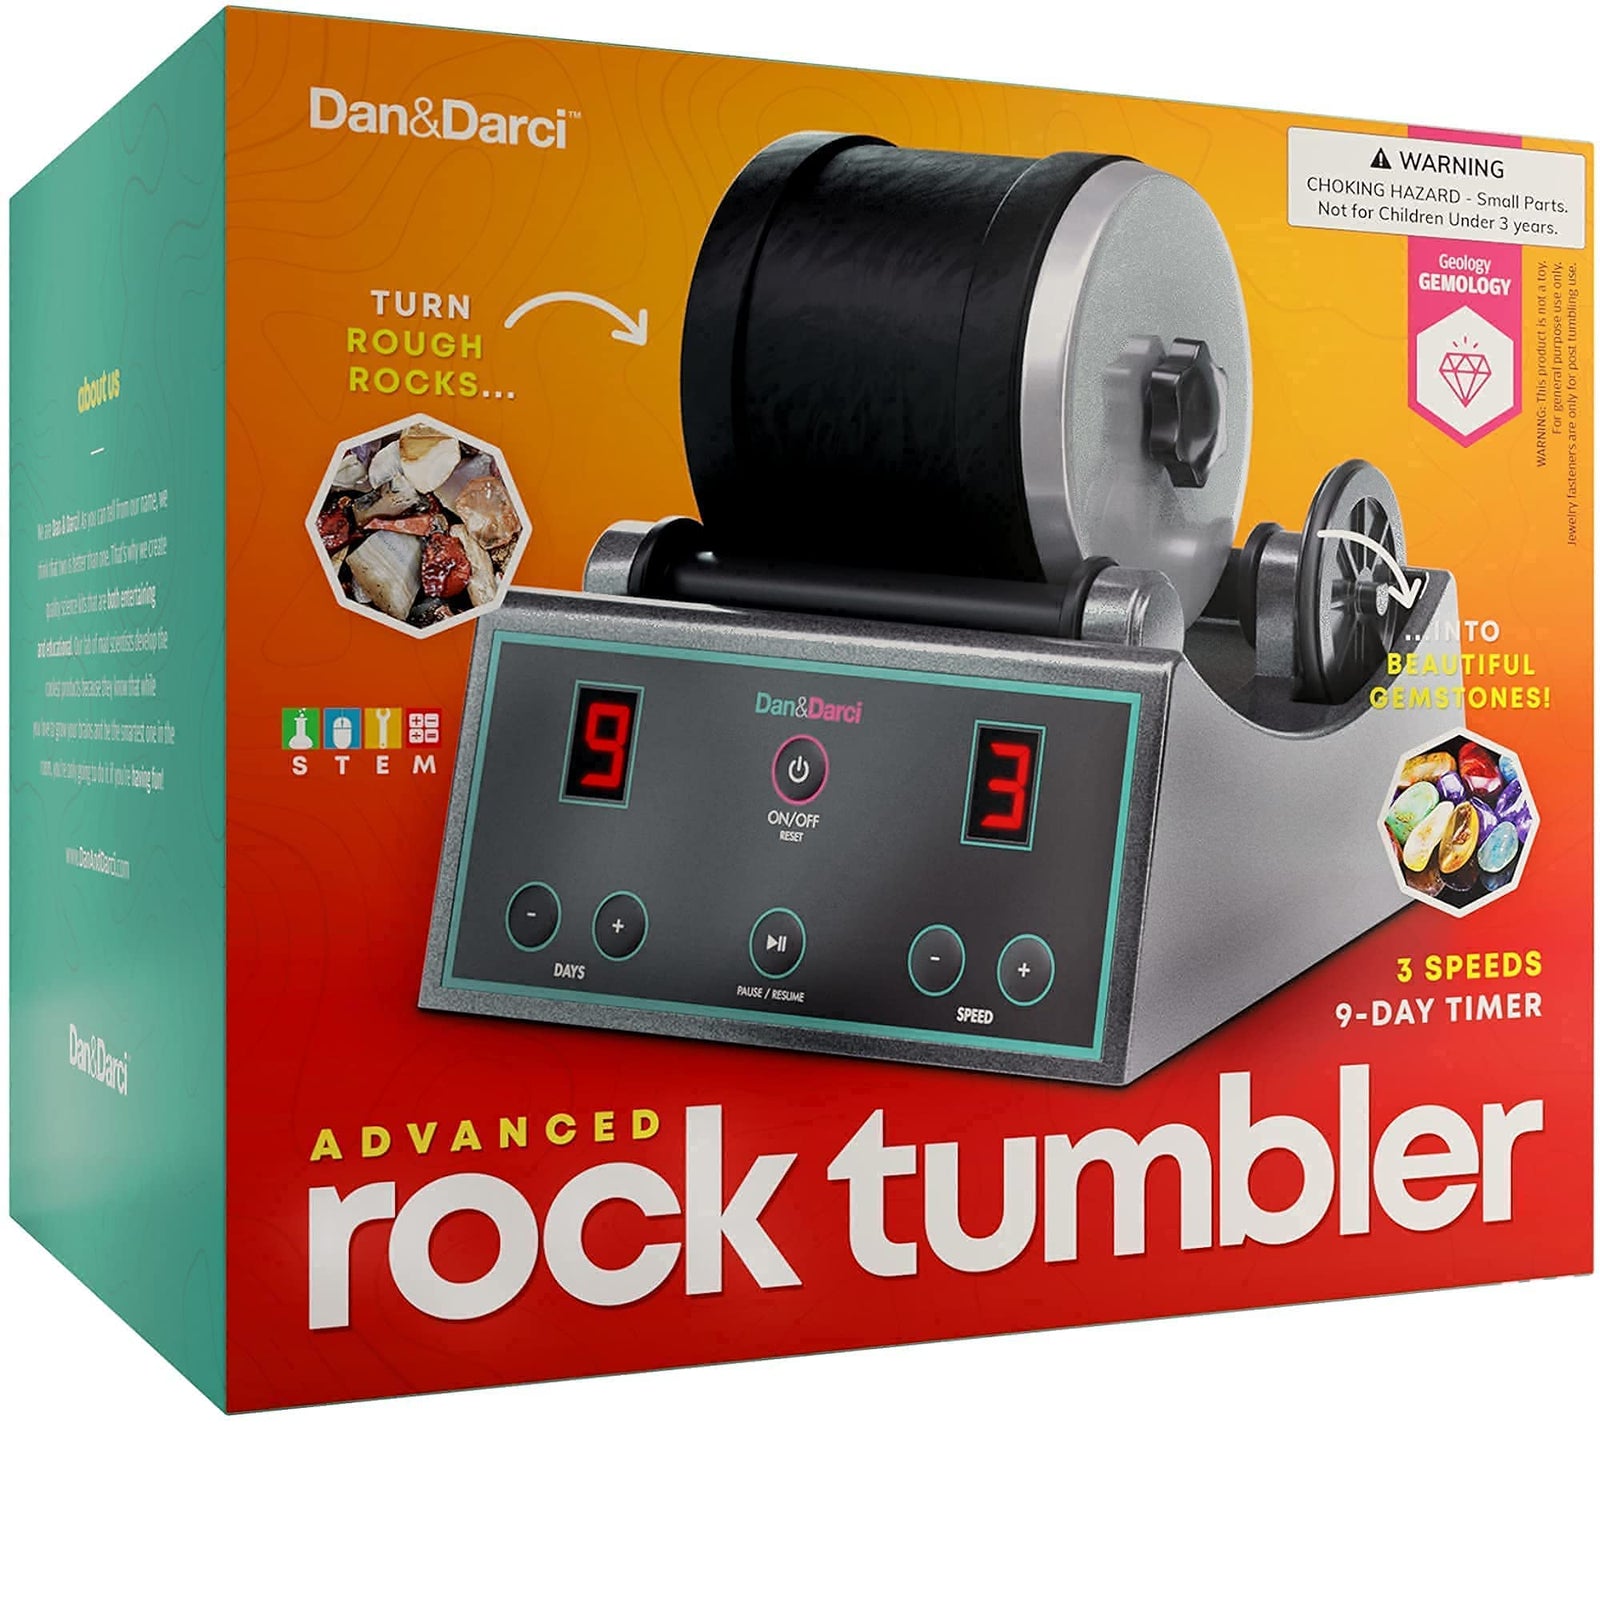 Advanced Professional Rock Tumbler Kit - with Digital 9-day Polishing timer & 3 speed settings - Turn Rough Rocks into Beautiful Gems : Great Science & STEM Gift for Kids all ages : Geology Toy